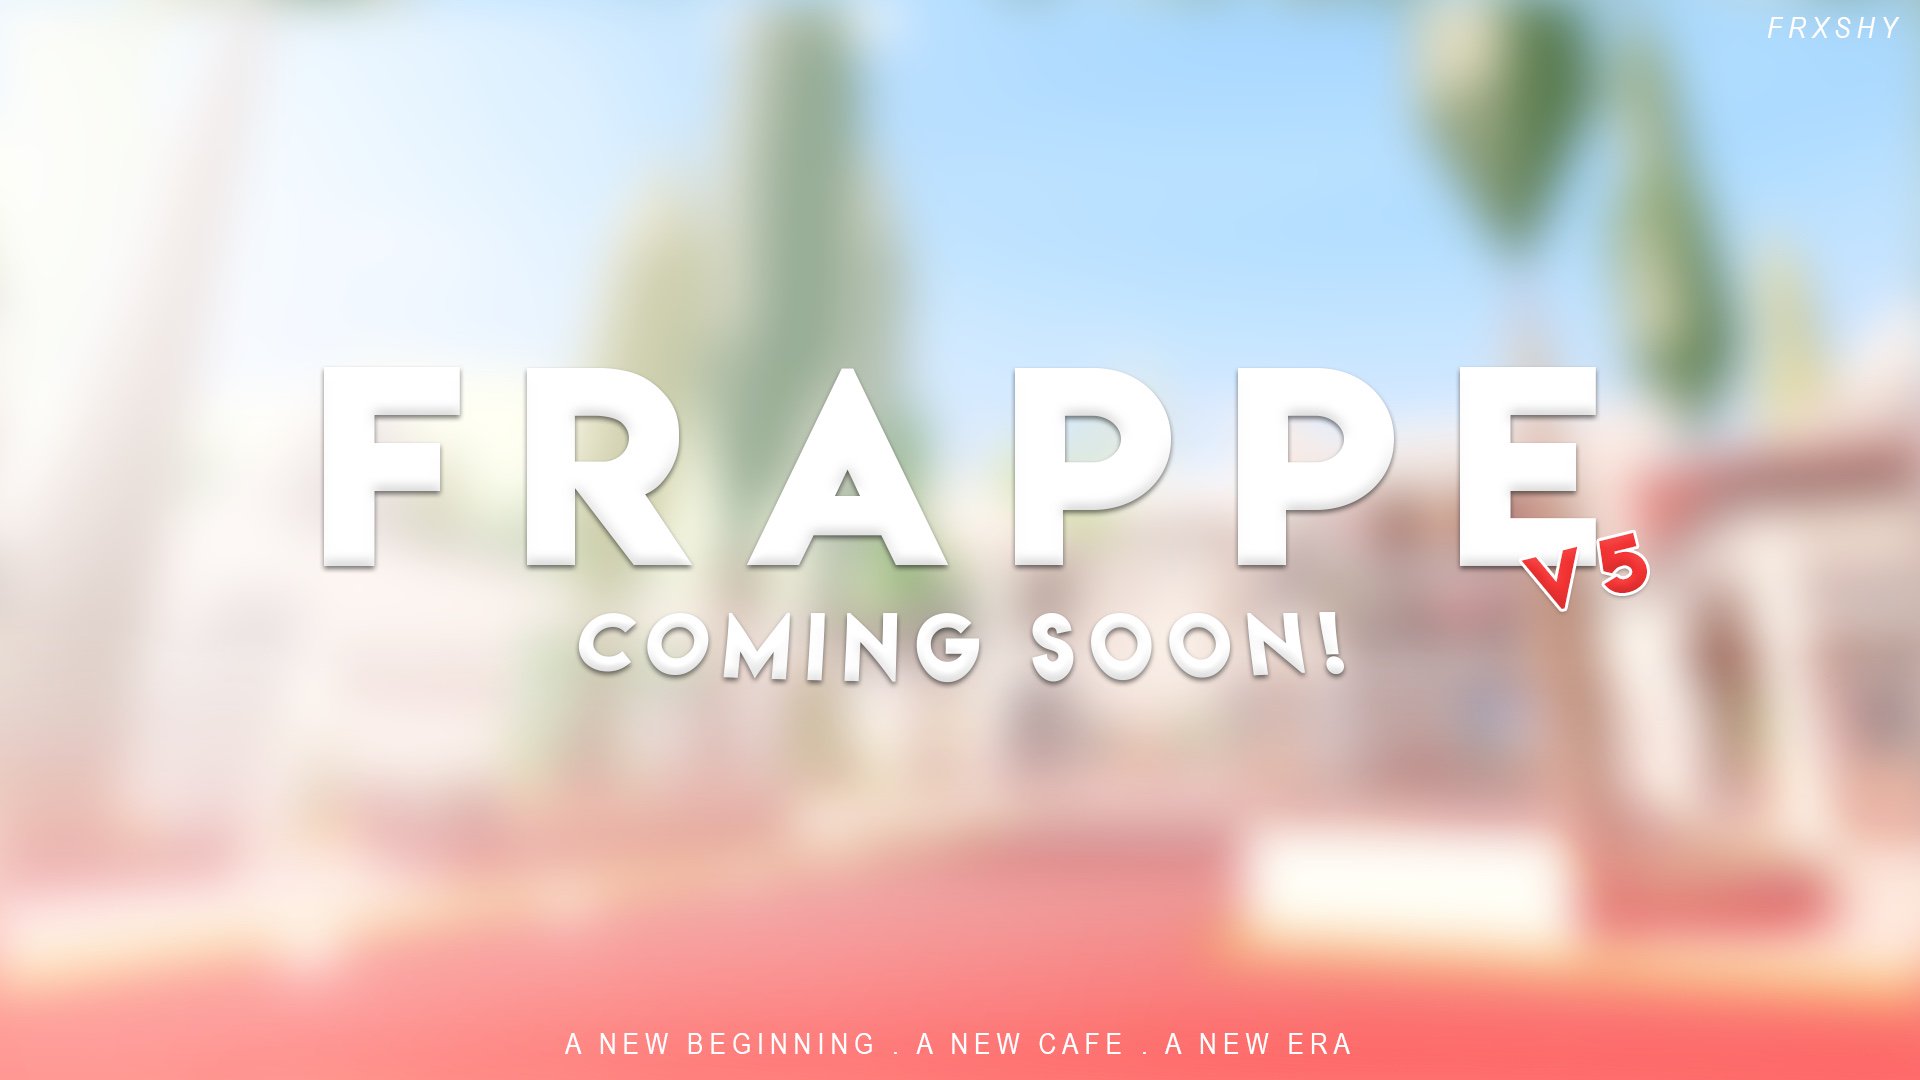 Frappe On Twitter It S Finally Here Frappe V5 More Information Soon To Follow - roblox frappe v5